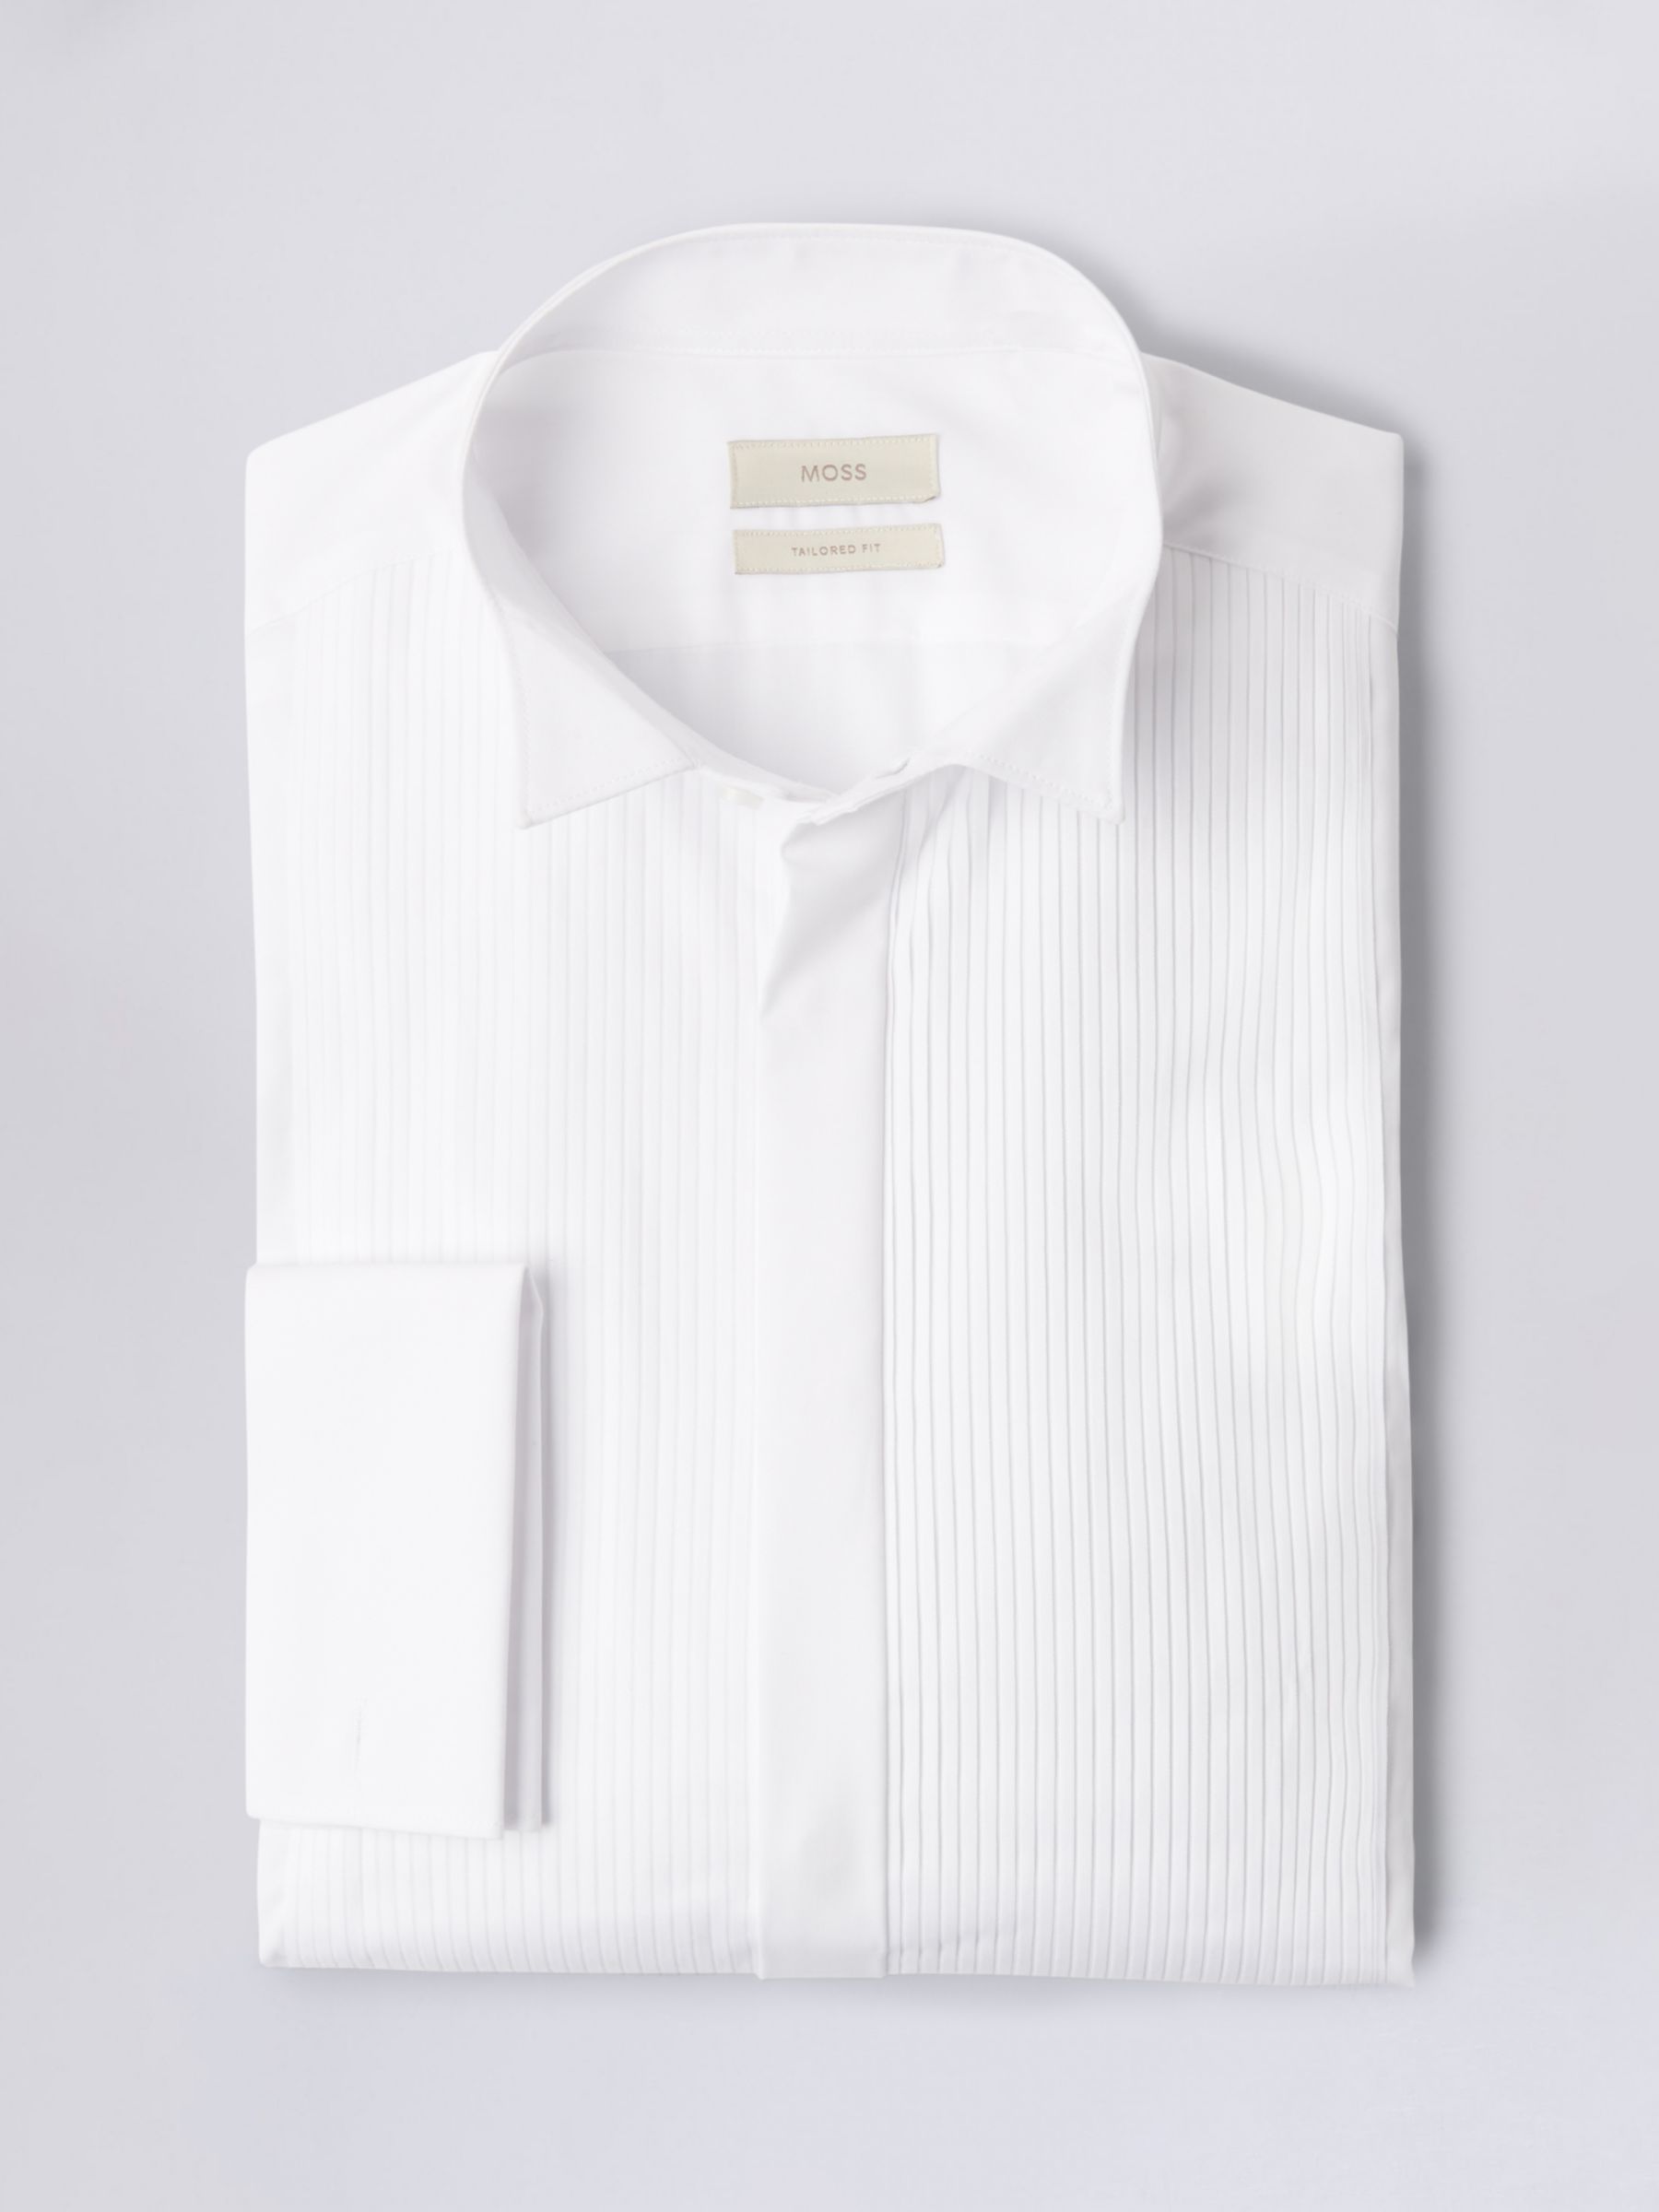 Moss Tailored Fit Wing Collar Dress Shirt, White, 14